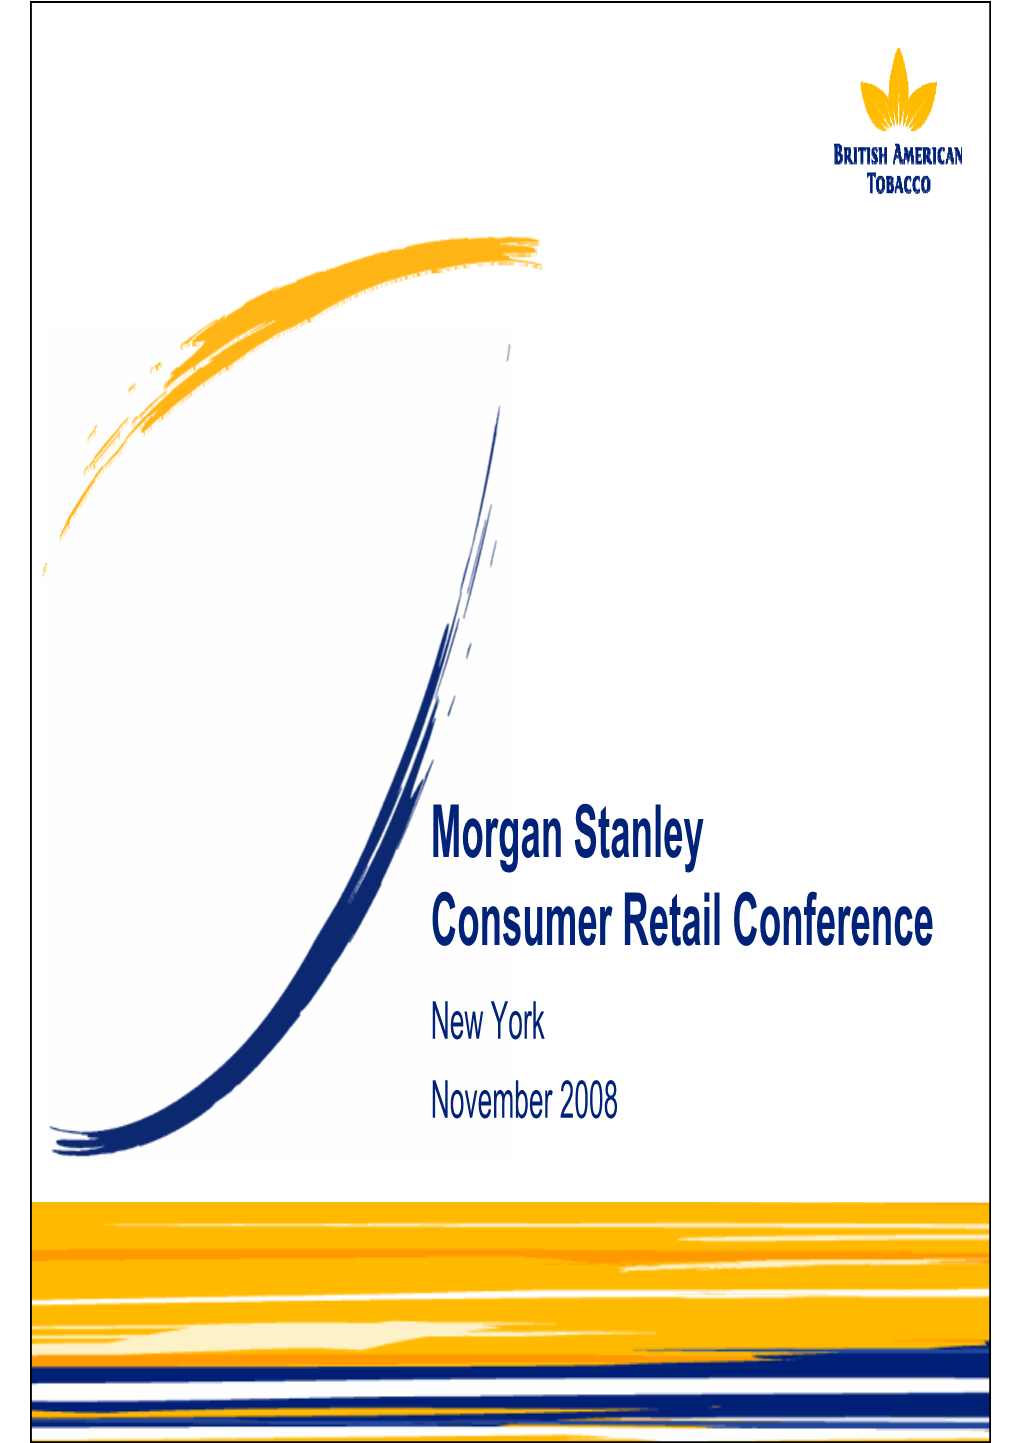 Morgan Stanley Consumer Retail Conference New York November 2008 Important Information